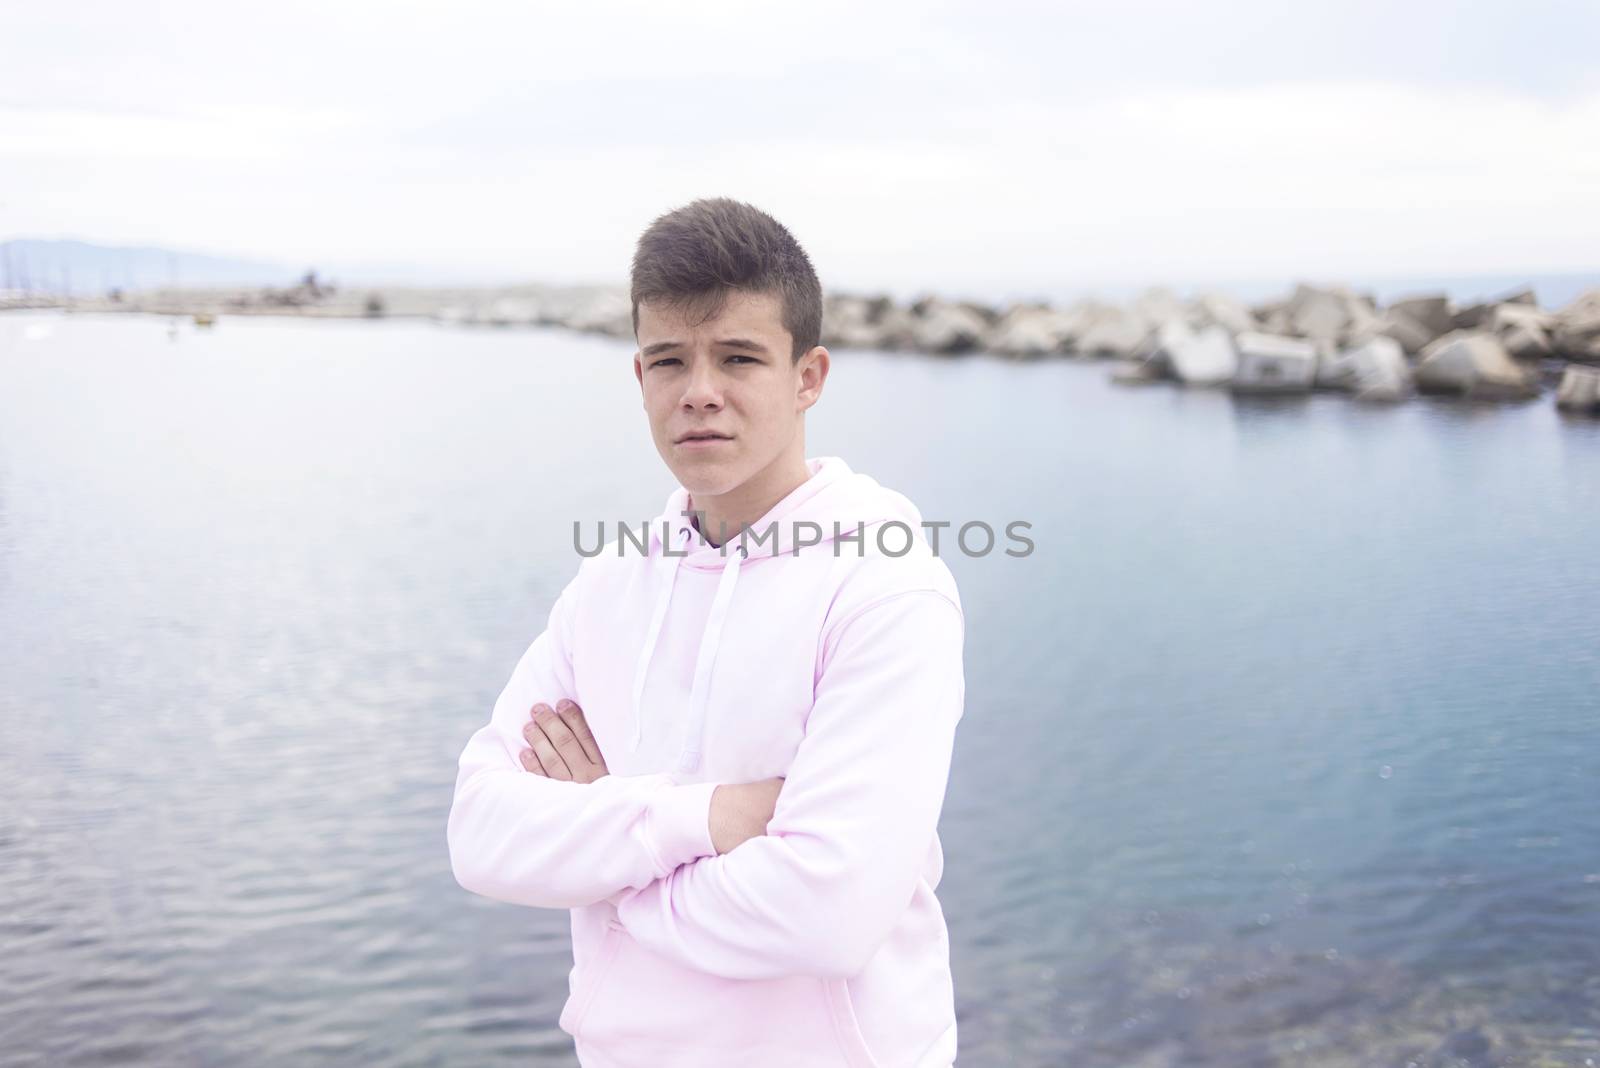 Young teenager with crossing arms standing on promenade while looking at camera